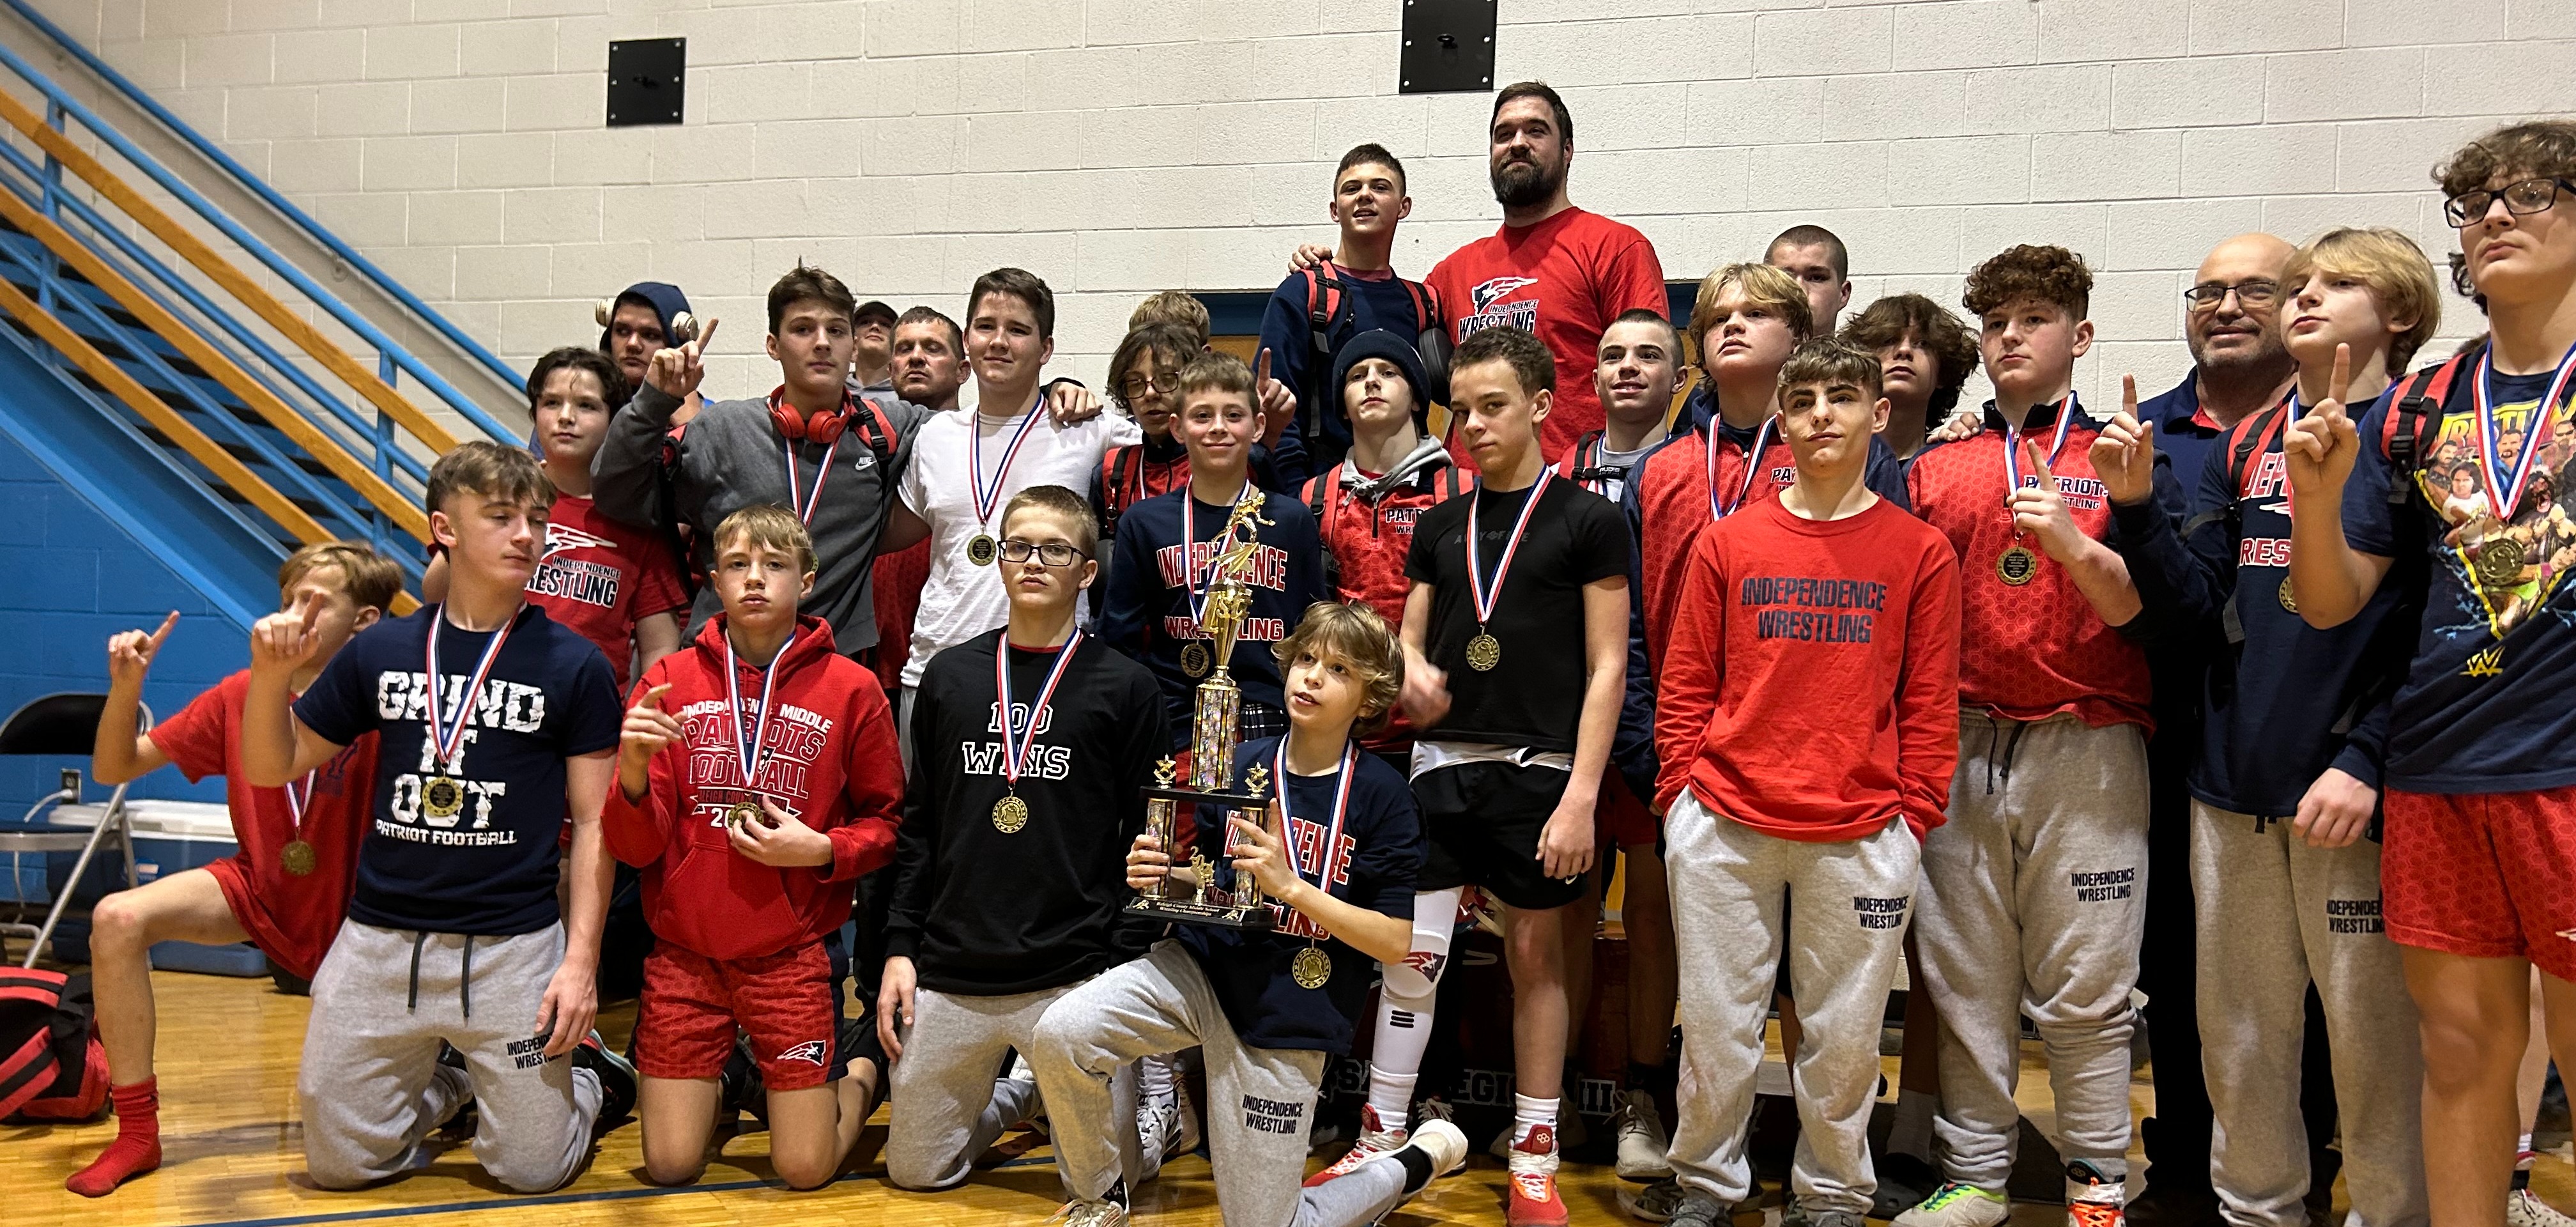 2023 Raleigh County Wrestling Champions 